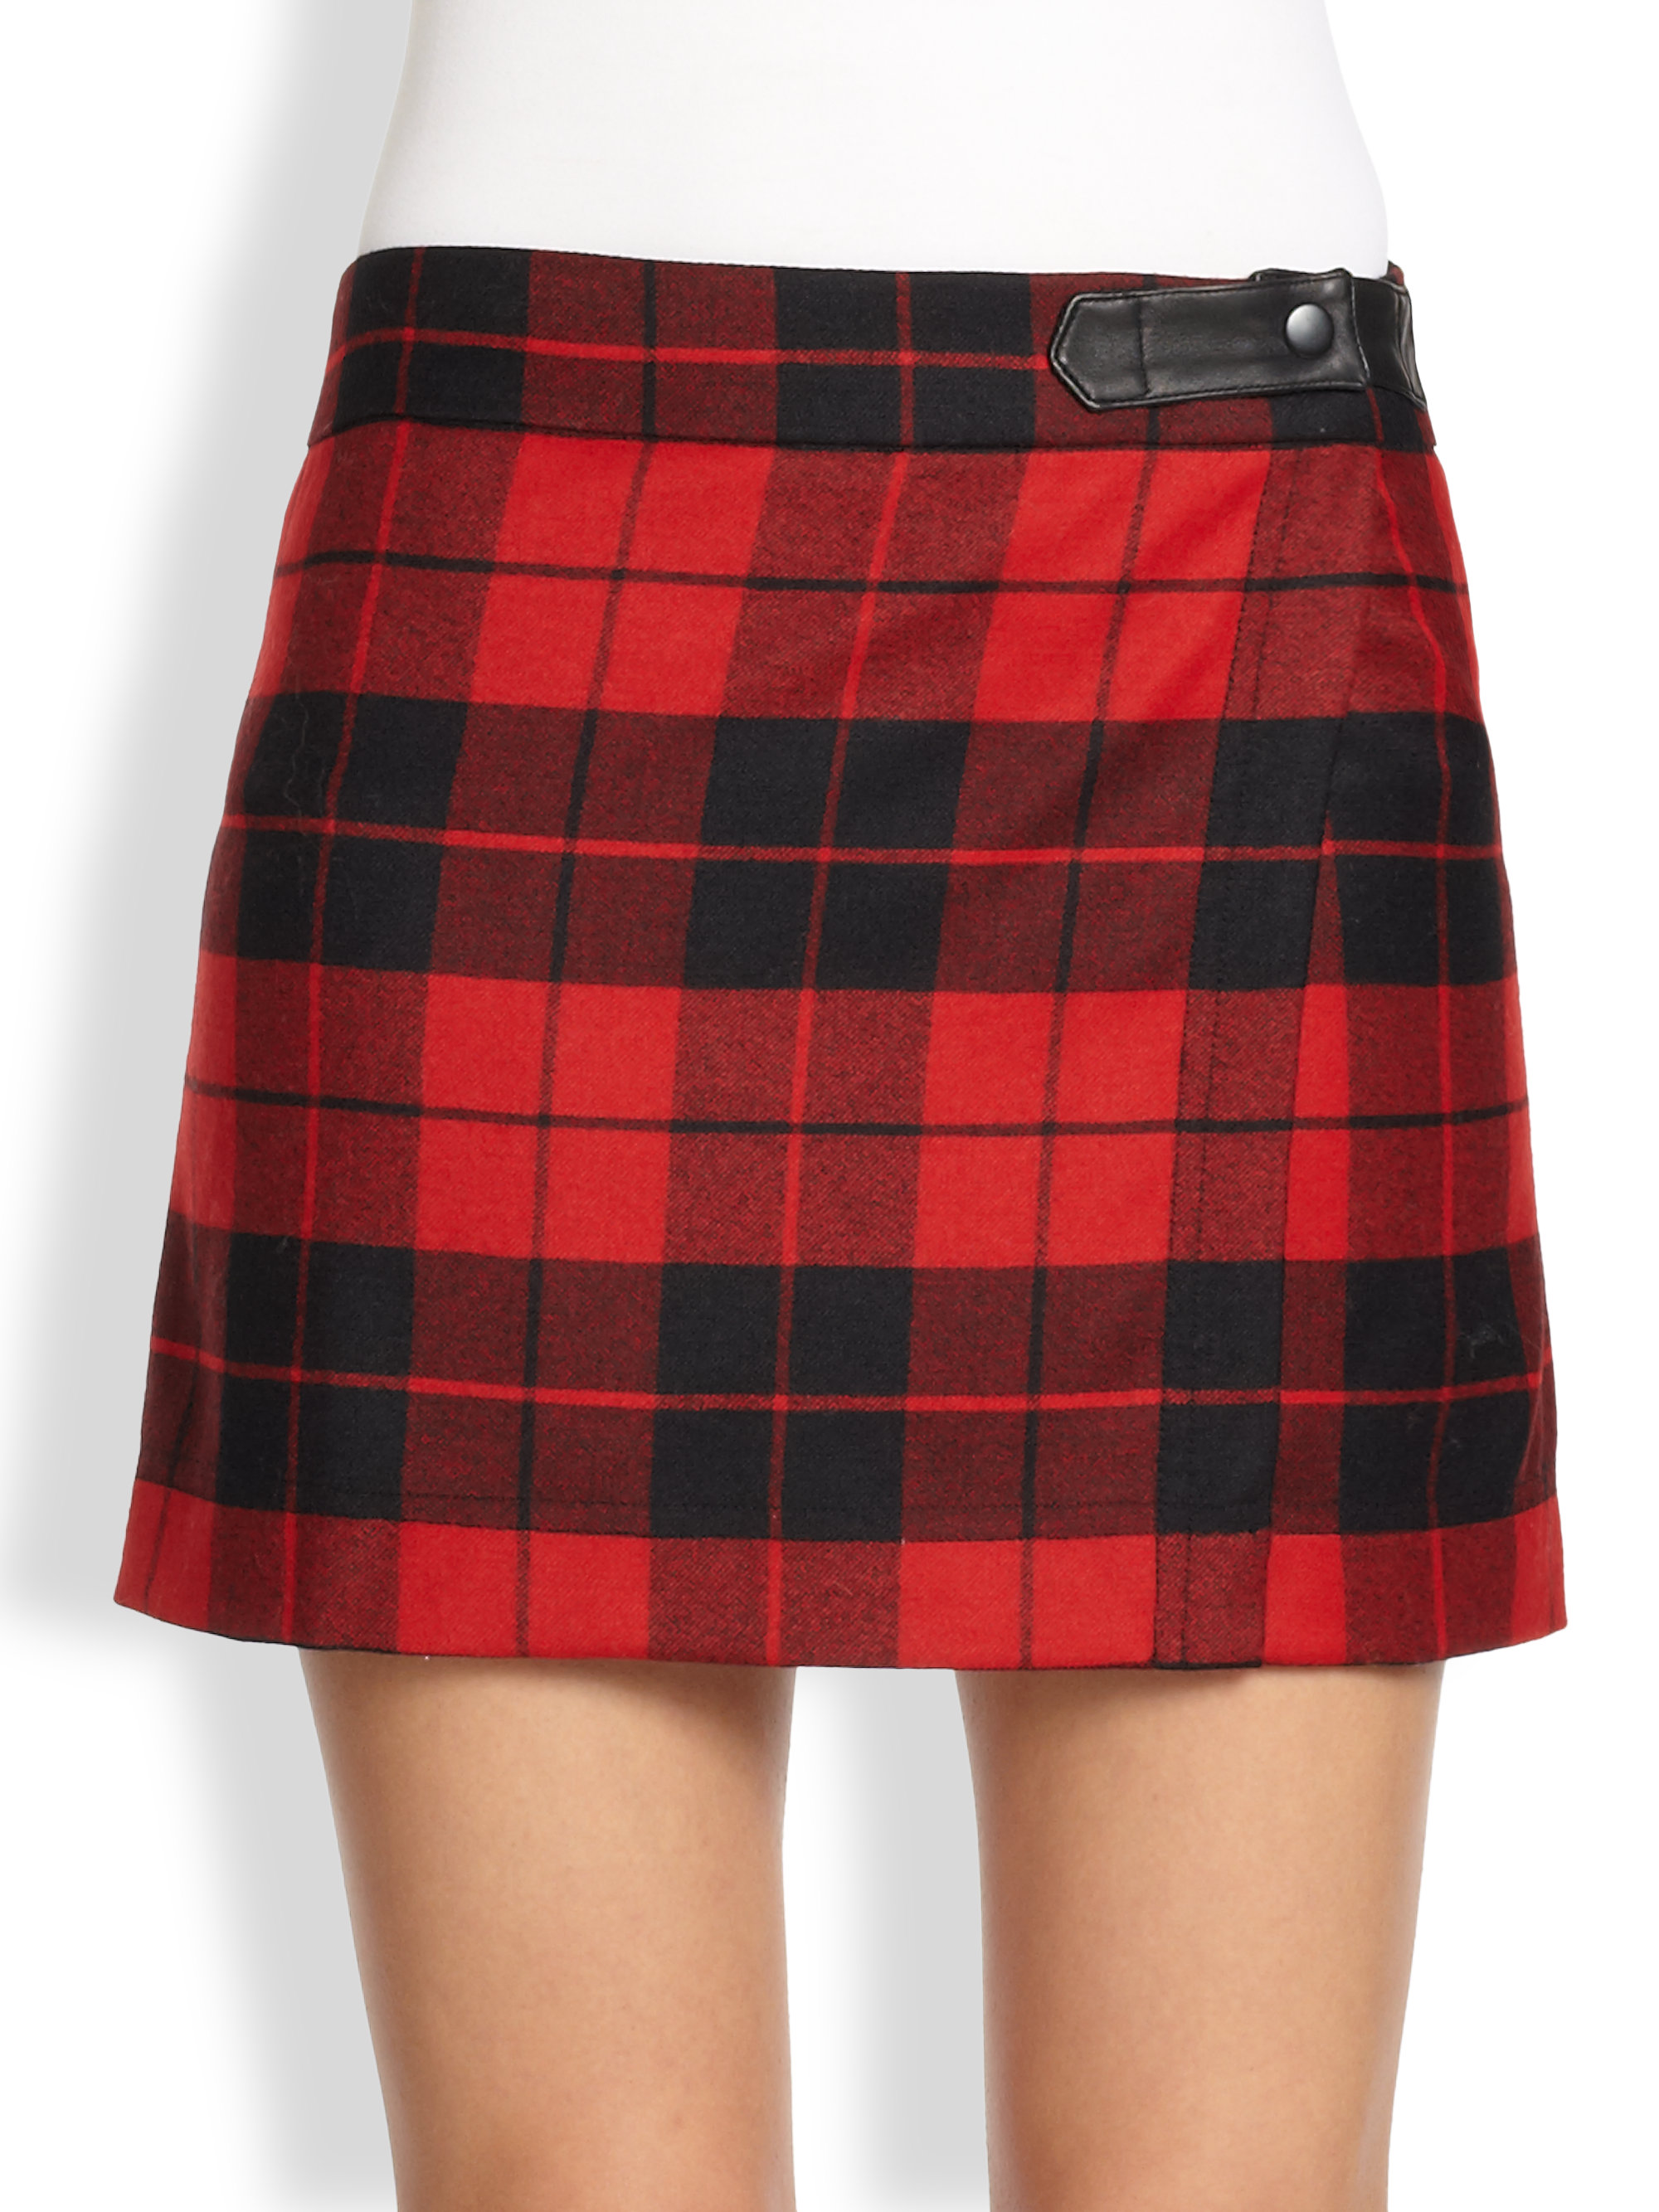 Red And Black Plaid Skirt - Skirts